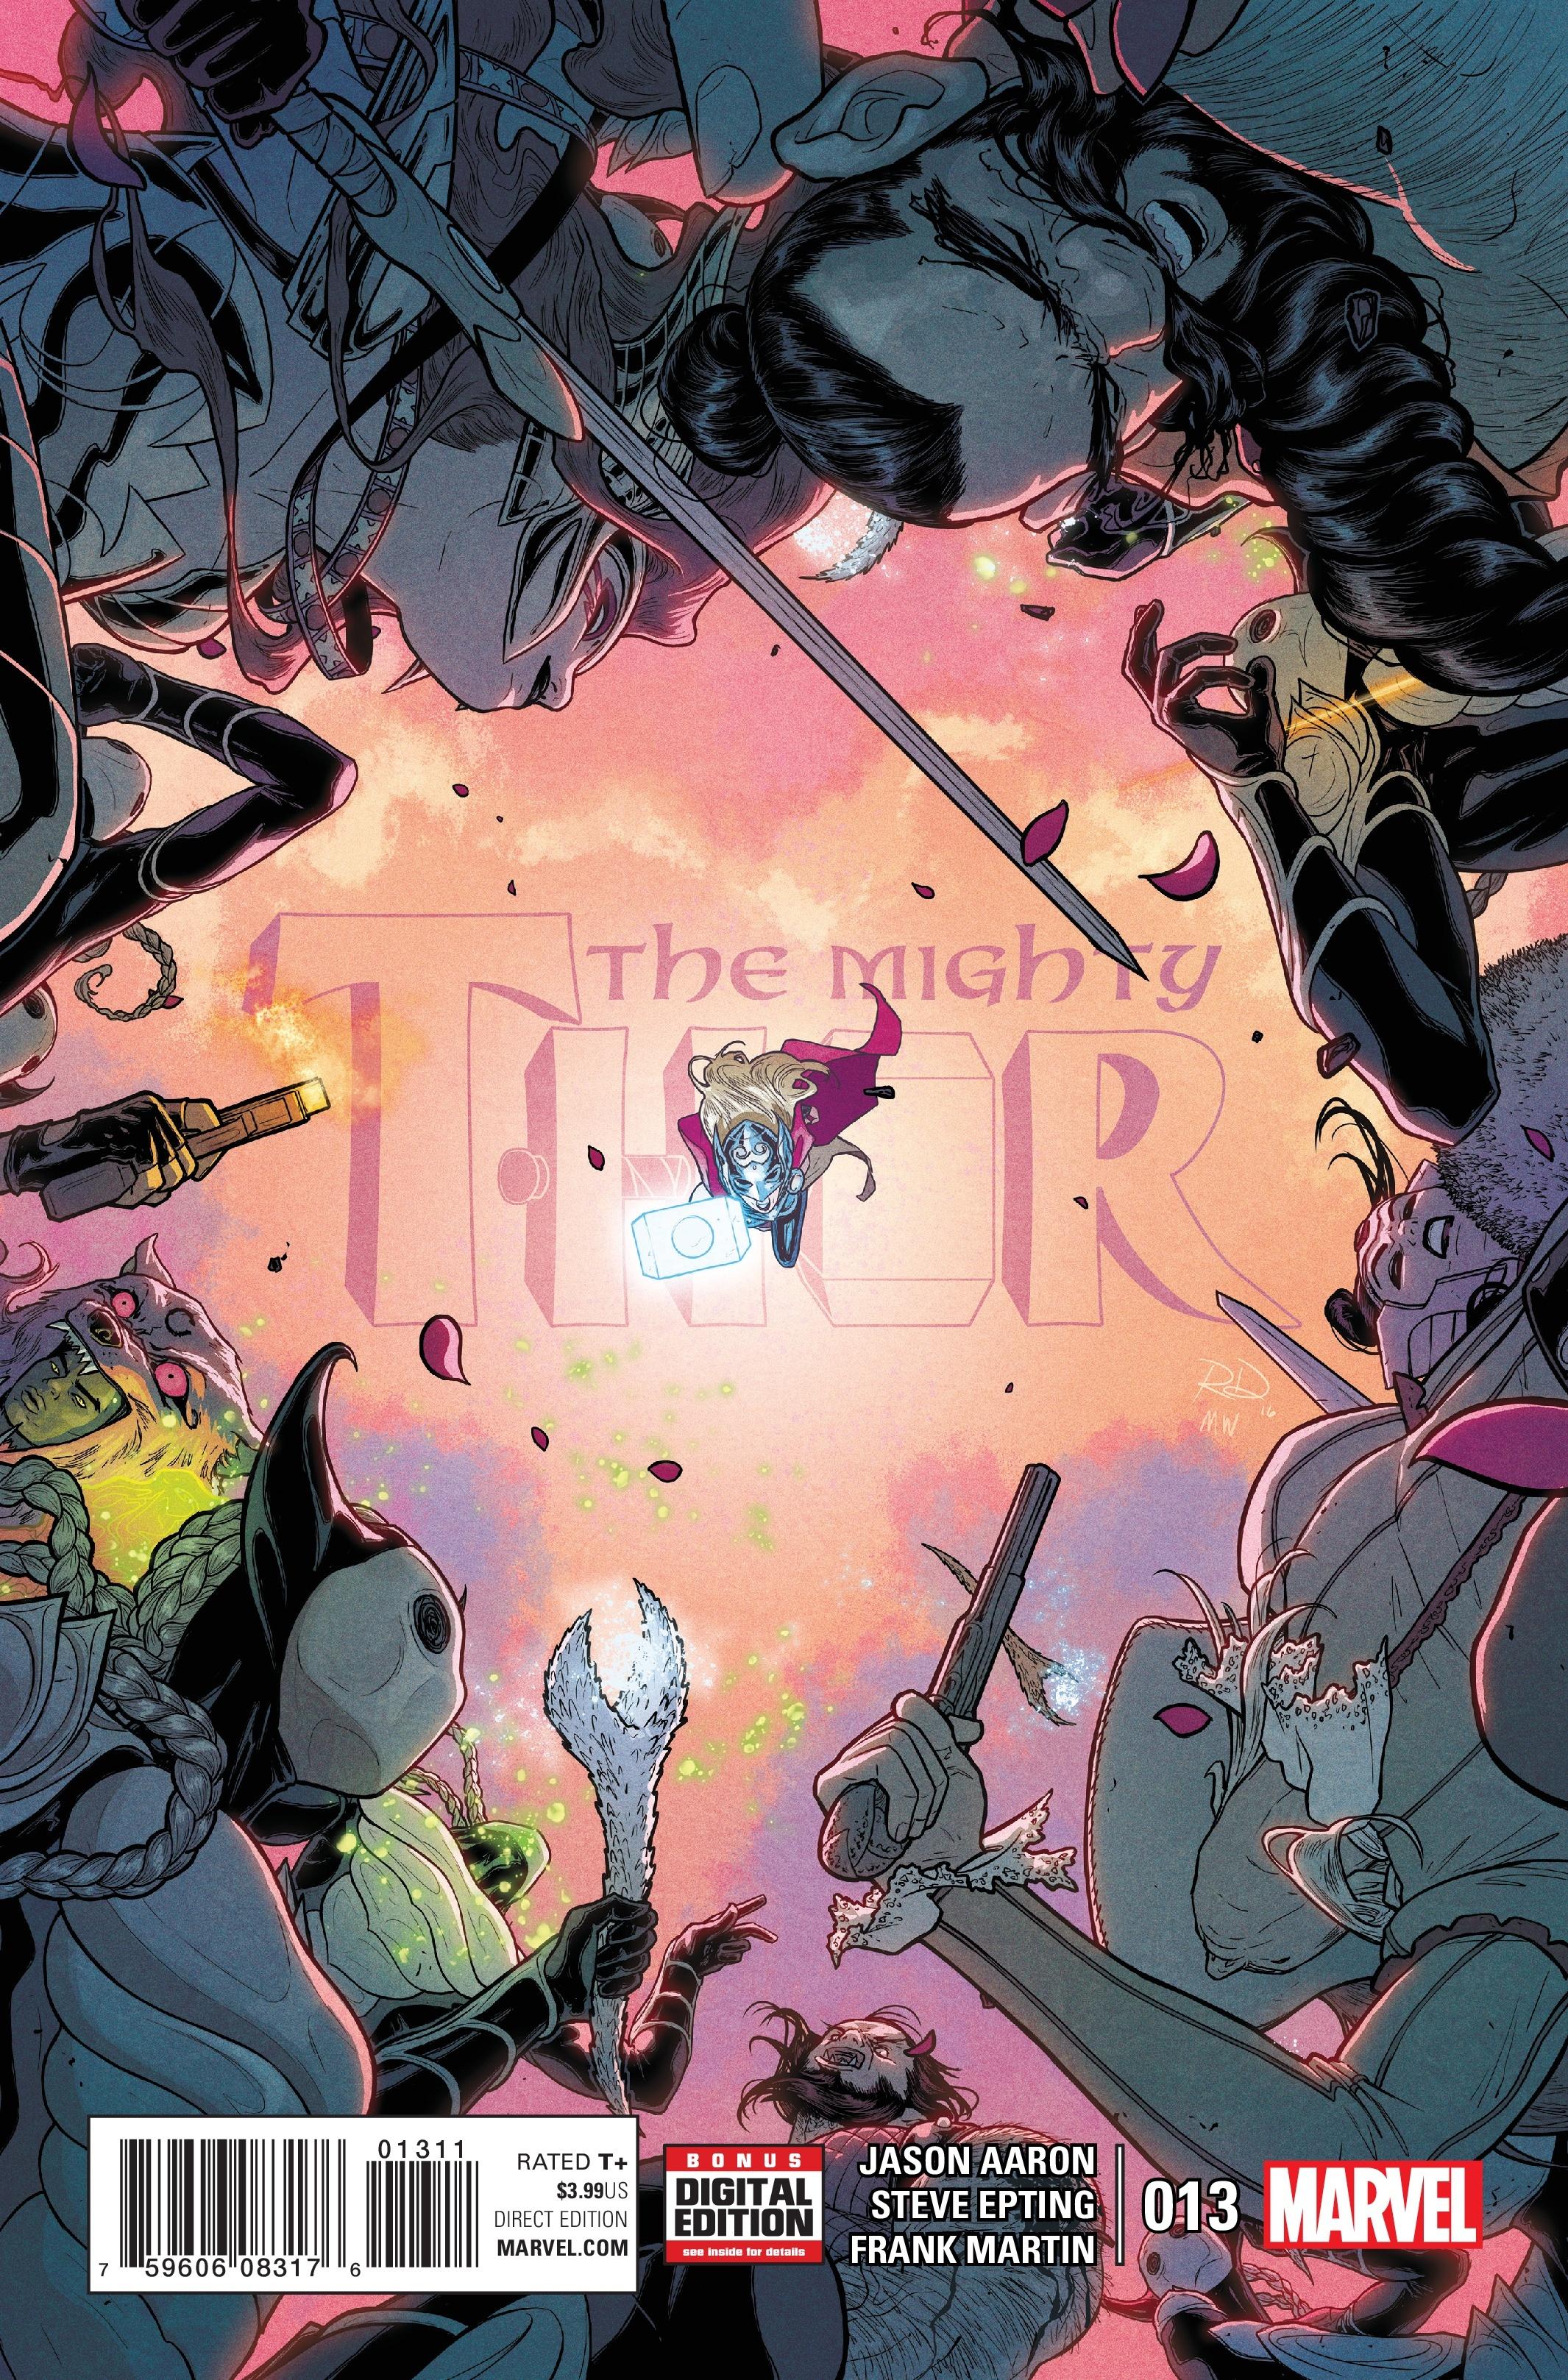 The Mighty Thor Vol. 2 #13